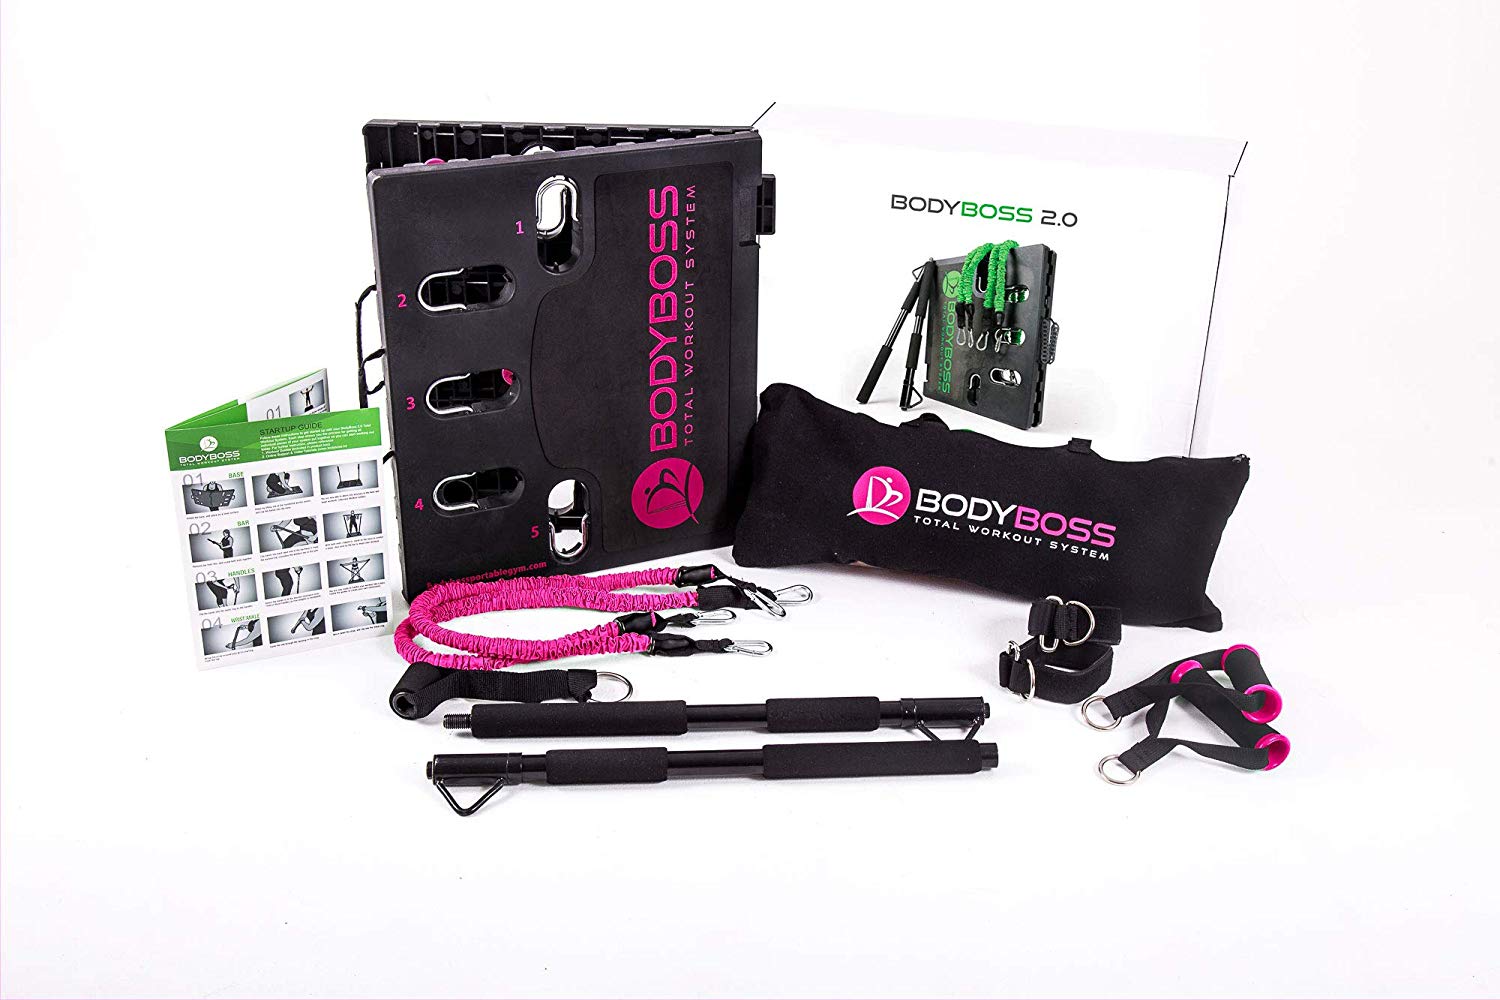 BodyBoss Home Gym 2.0 - Full Portable Gym Home Workout Package + 1 Set of Resistance Bands - Collapsible Resistance Bar, Handles - Full Body Workouts